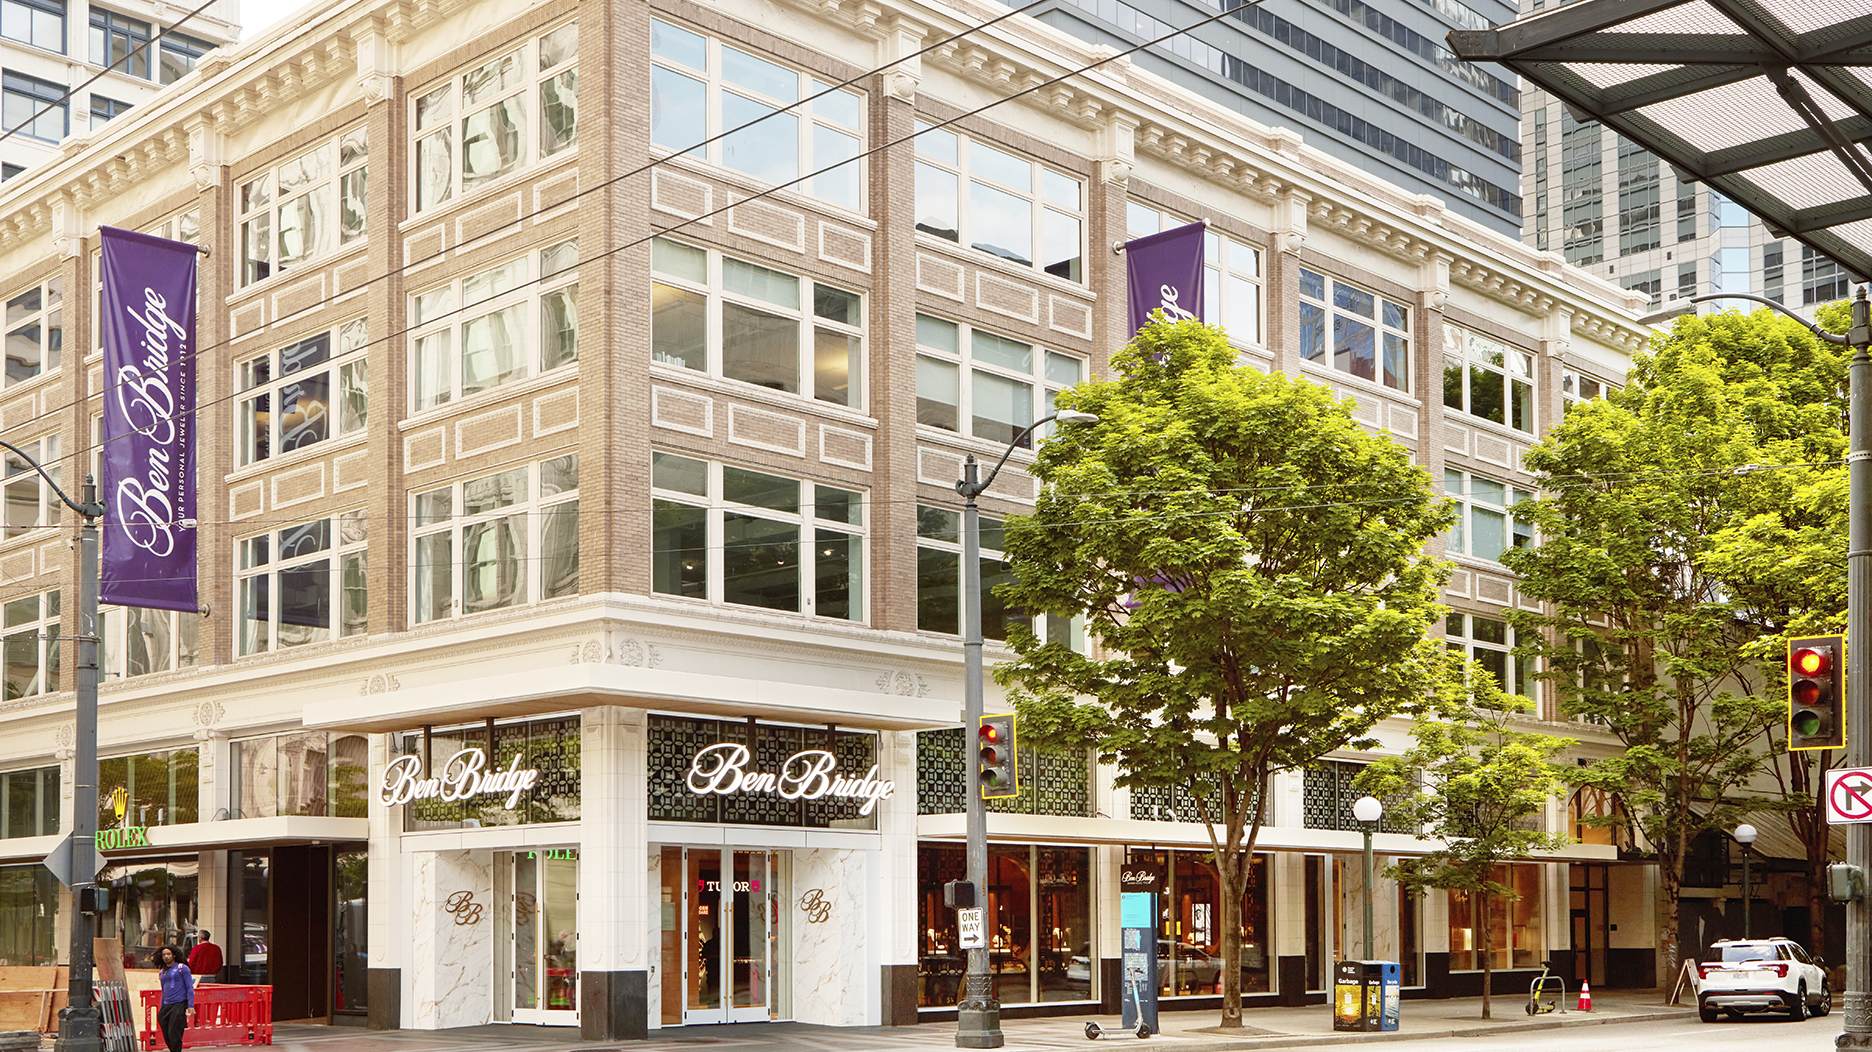 SOLD OUT!!! A Renovation - The Nordstrom Downtown Seattle Flagship Store